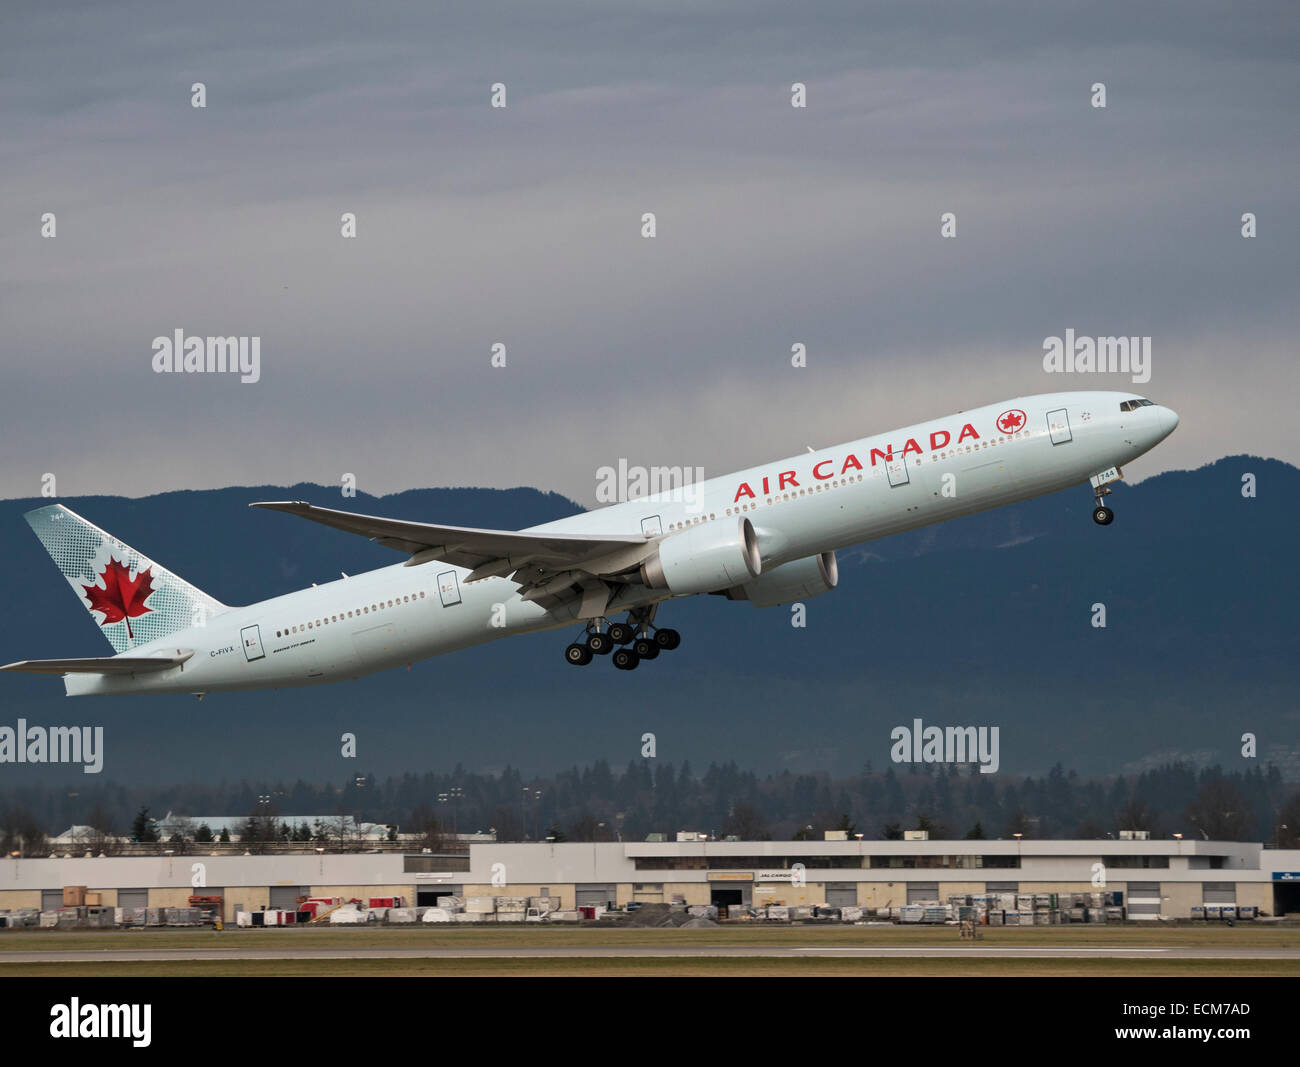 An Air Canada Boeing 777-300ER (C-FIVX; Fin#744) jetliner departs from Vancouver International Airport, Canada Stock Photo